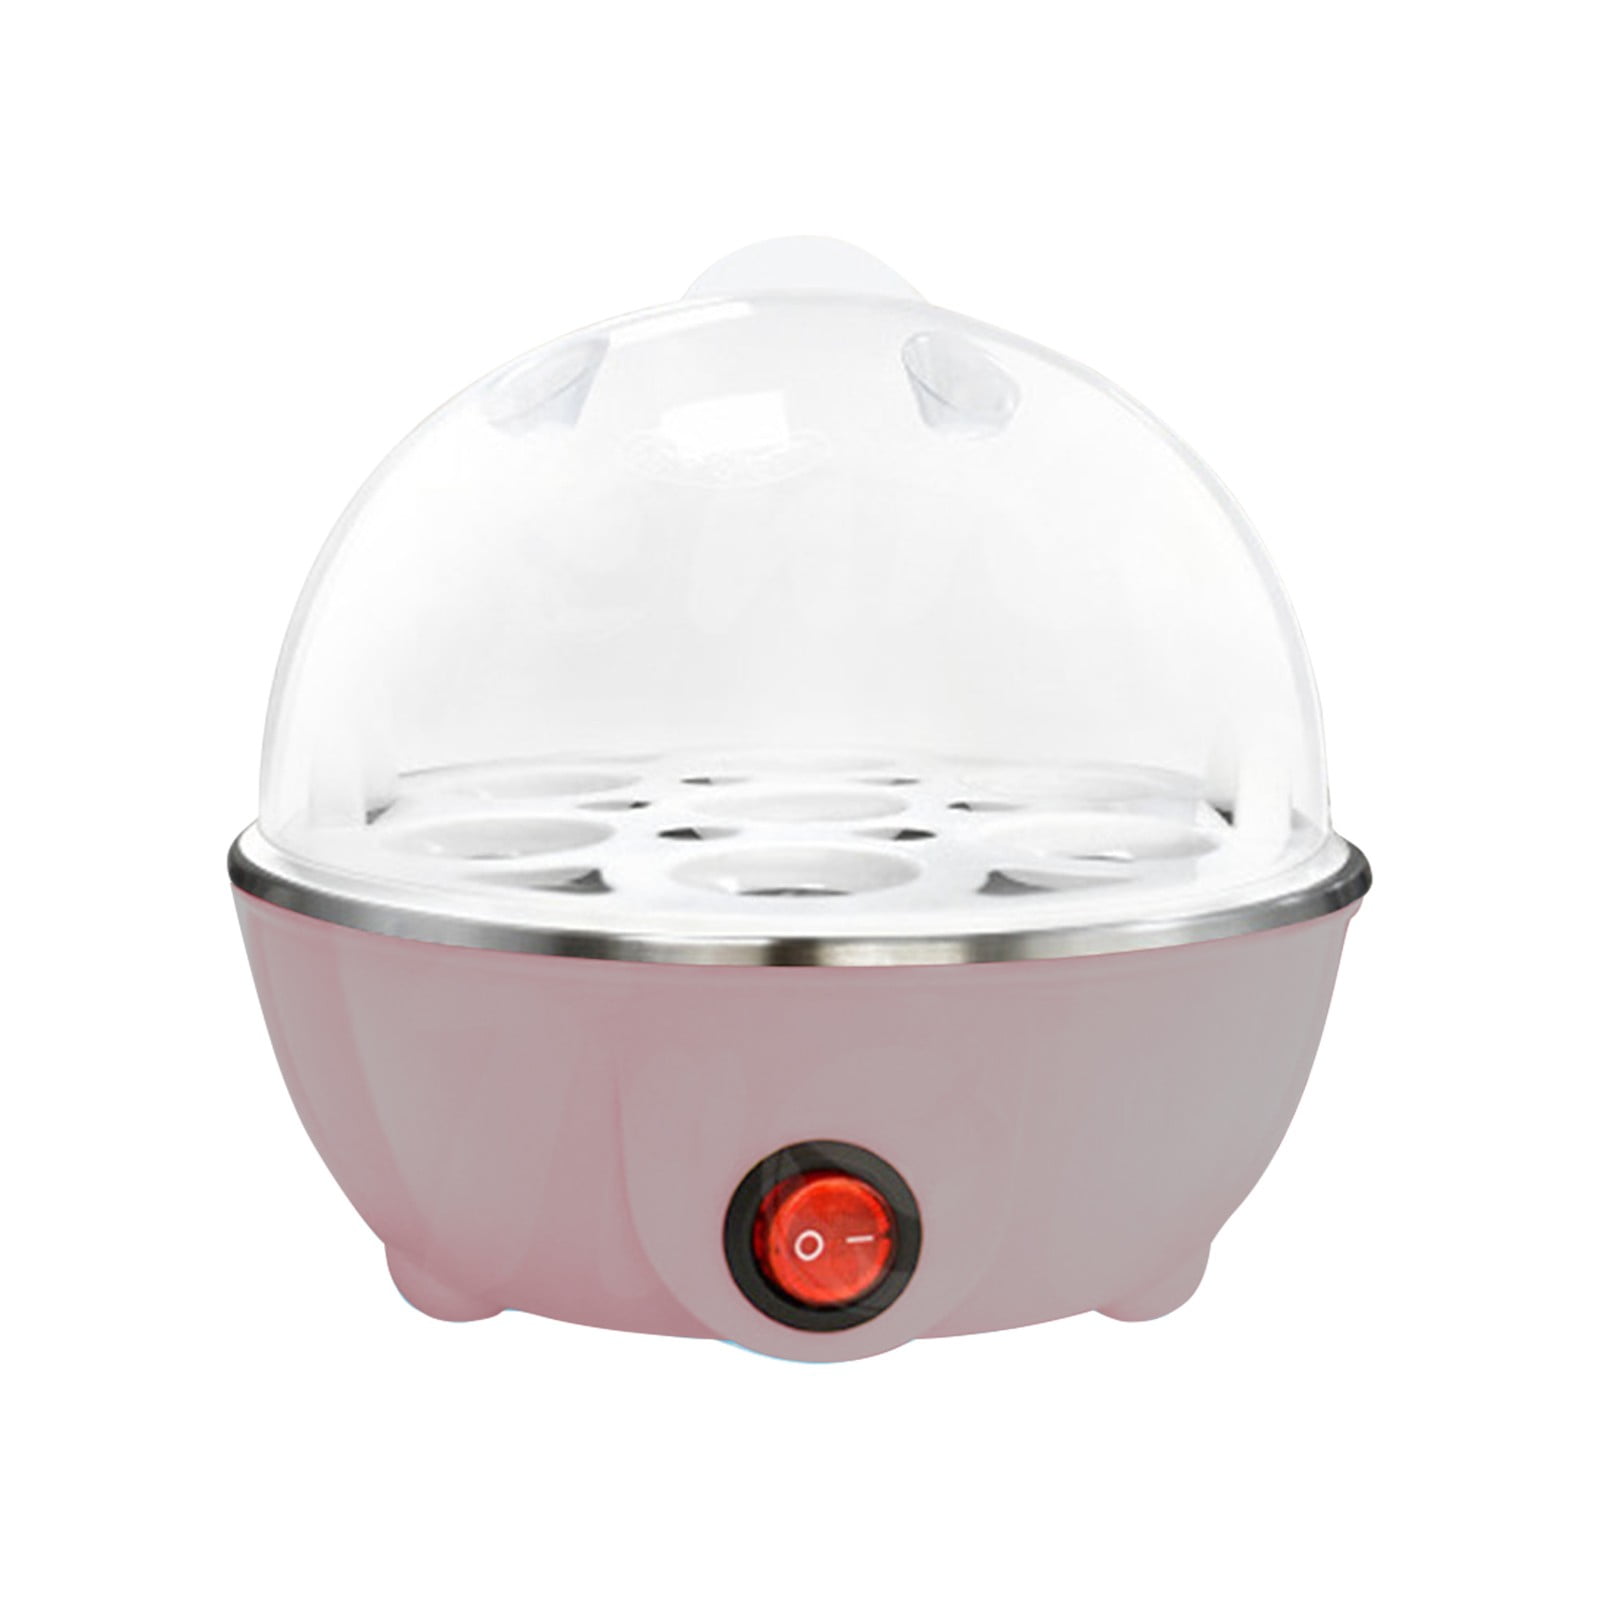 Egg Cooker Egg Boiler Machine Hard Boiled Egg Cooker Multifunctional Egg  Maker Machine with Auto Shut Off Feature for Soft Half - AliExpress